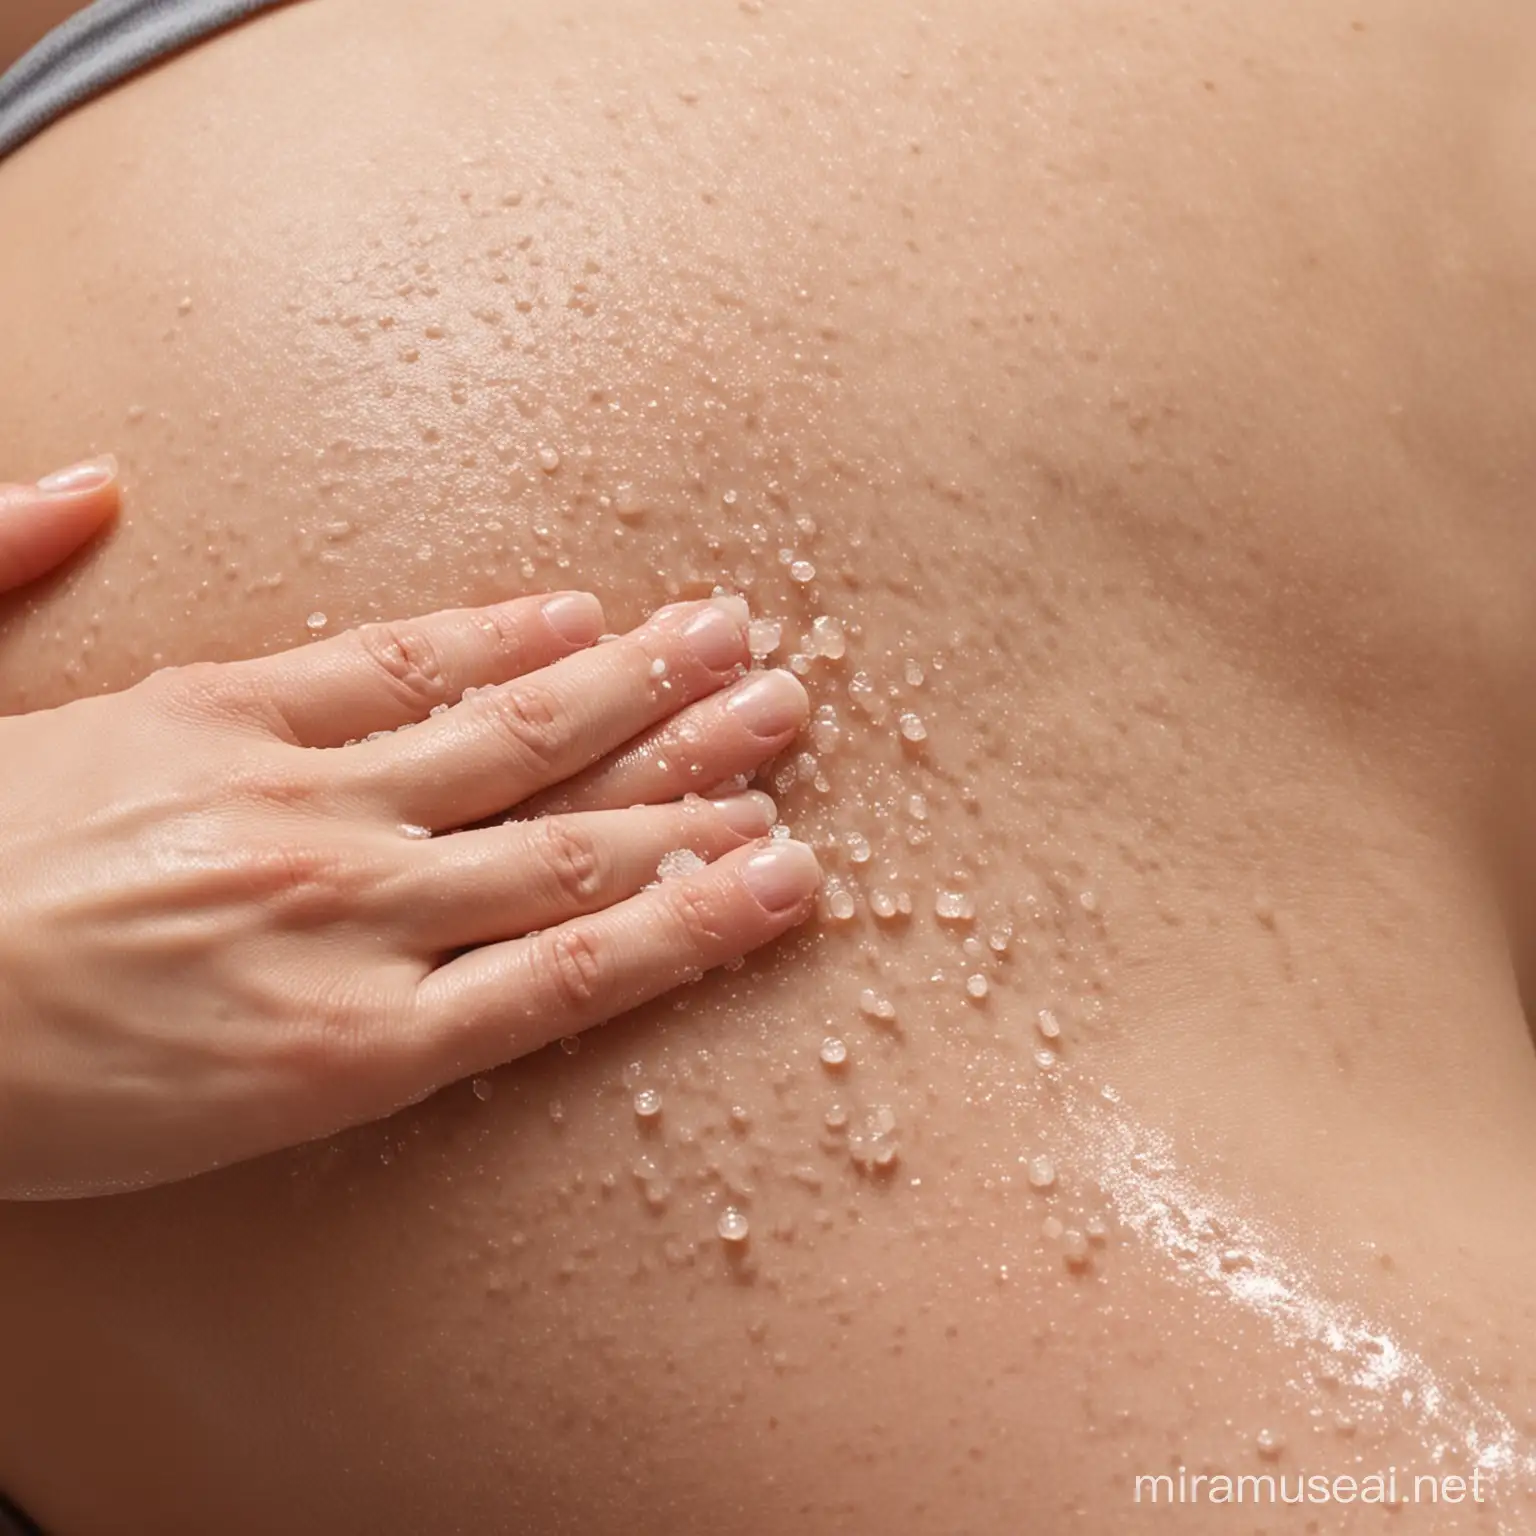 An image of the scrub being applied to the skin, with visible exfoliating beads or particles, to demonstrate how it works to remove dead skin cells and reveal healthier-looking skin.